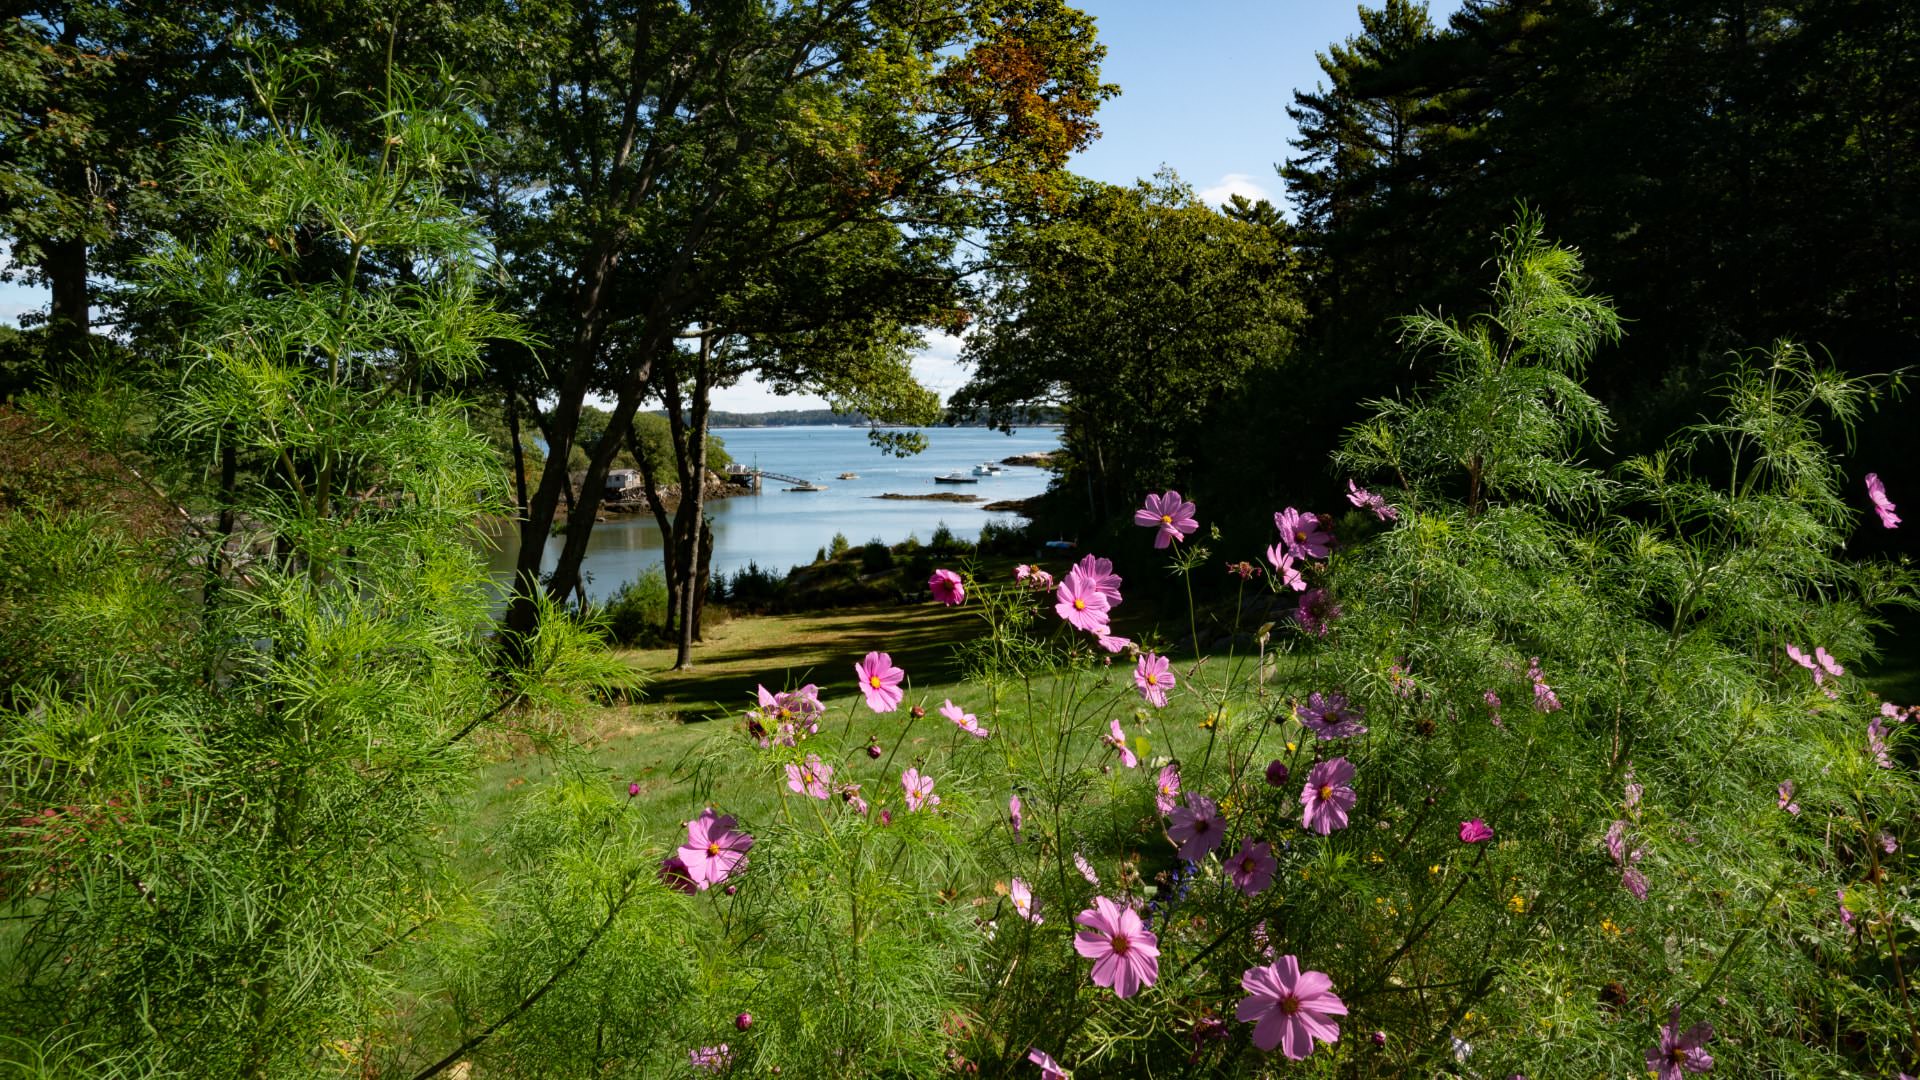 Close up view of light purple flowers with green grass, green trees, and cove of water in the background